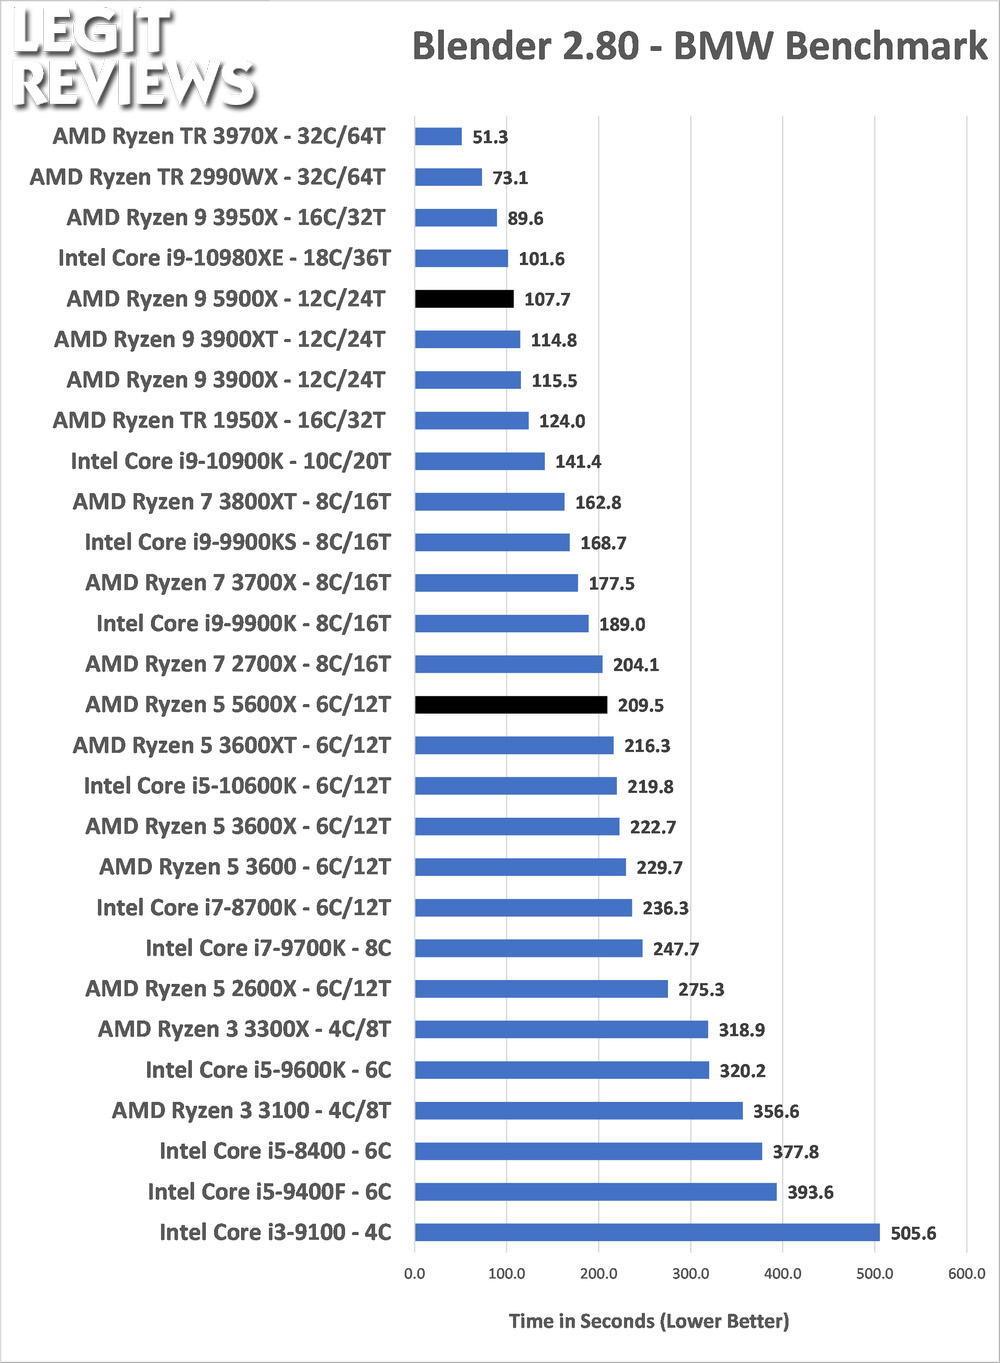 AMD Ryzen 5900X and Ryzen 5 CPU Review - Page 3 of 9 - Legit Reviews